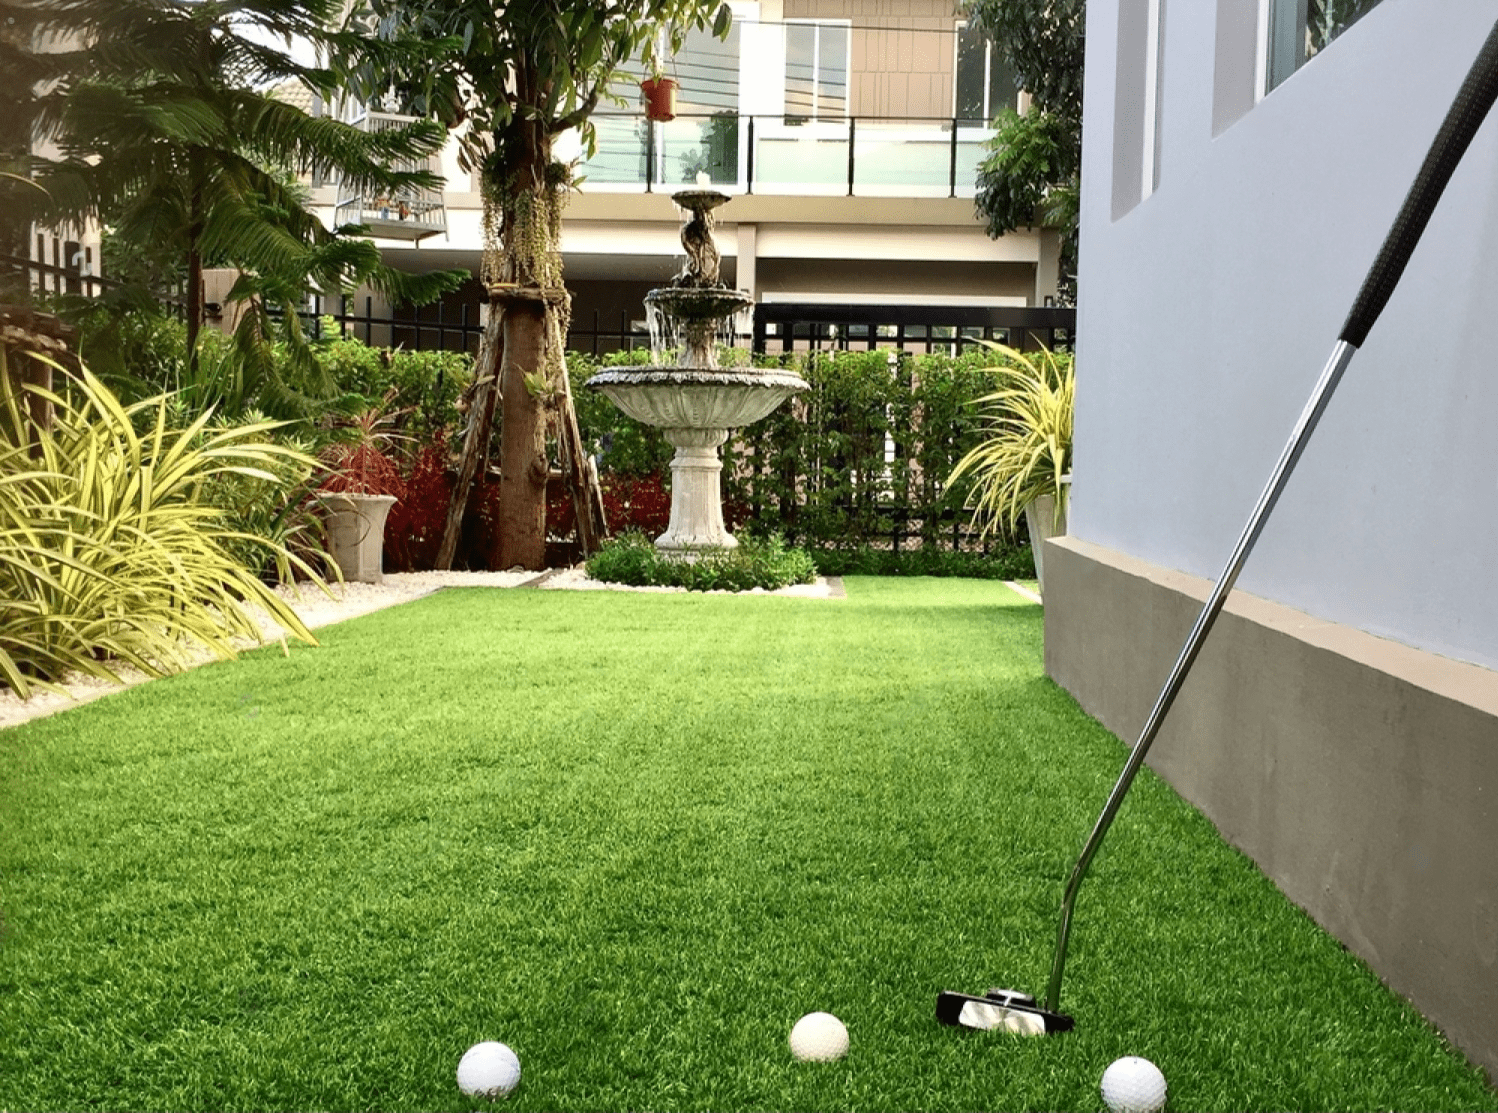 practice golf at home